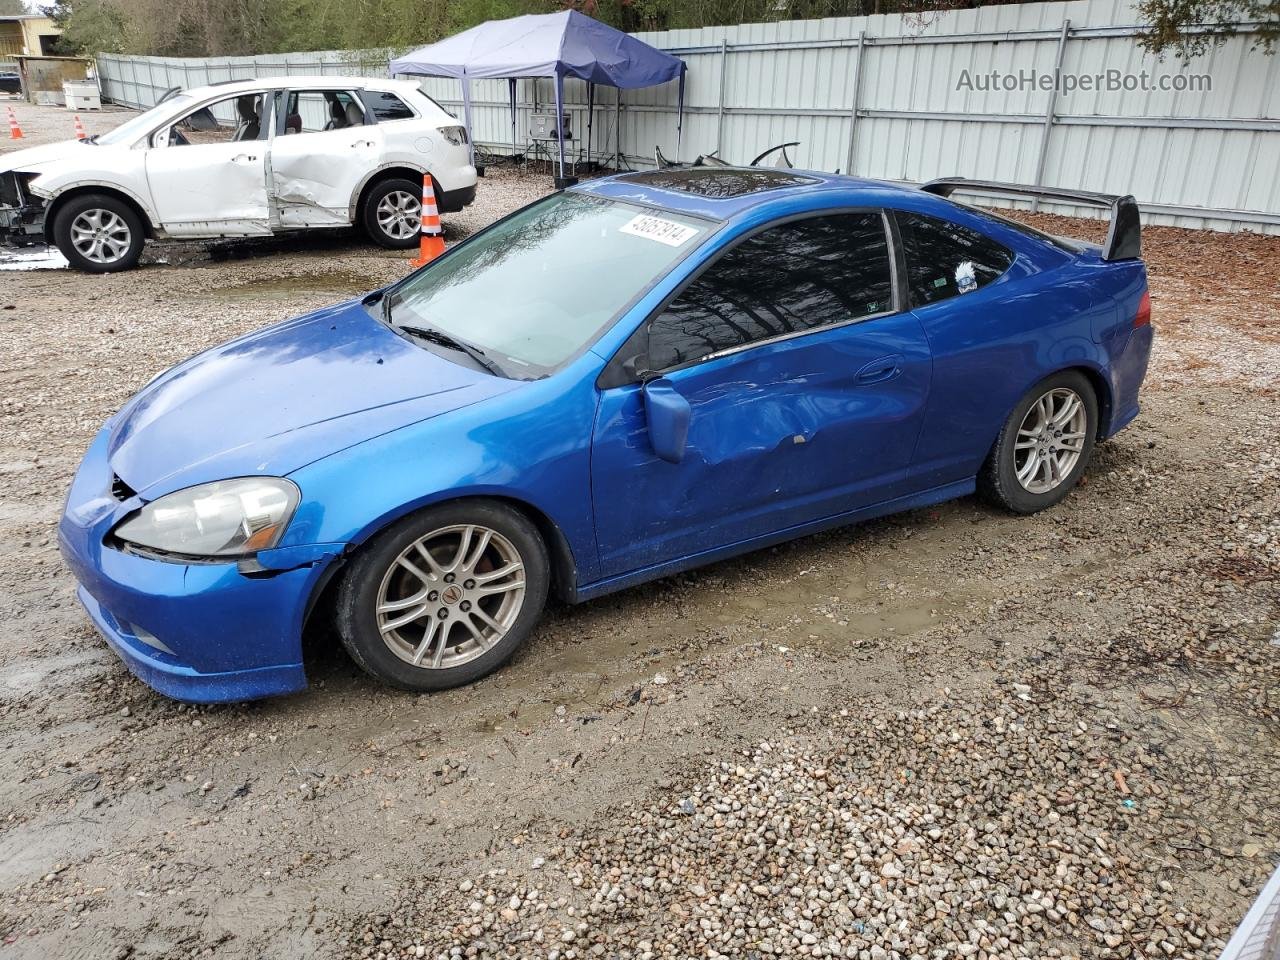 2006 Acura Rsx  Blue vin: JH4DC54886S016786